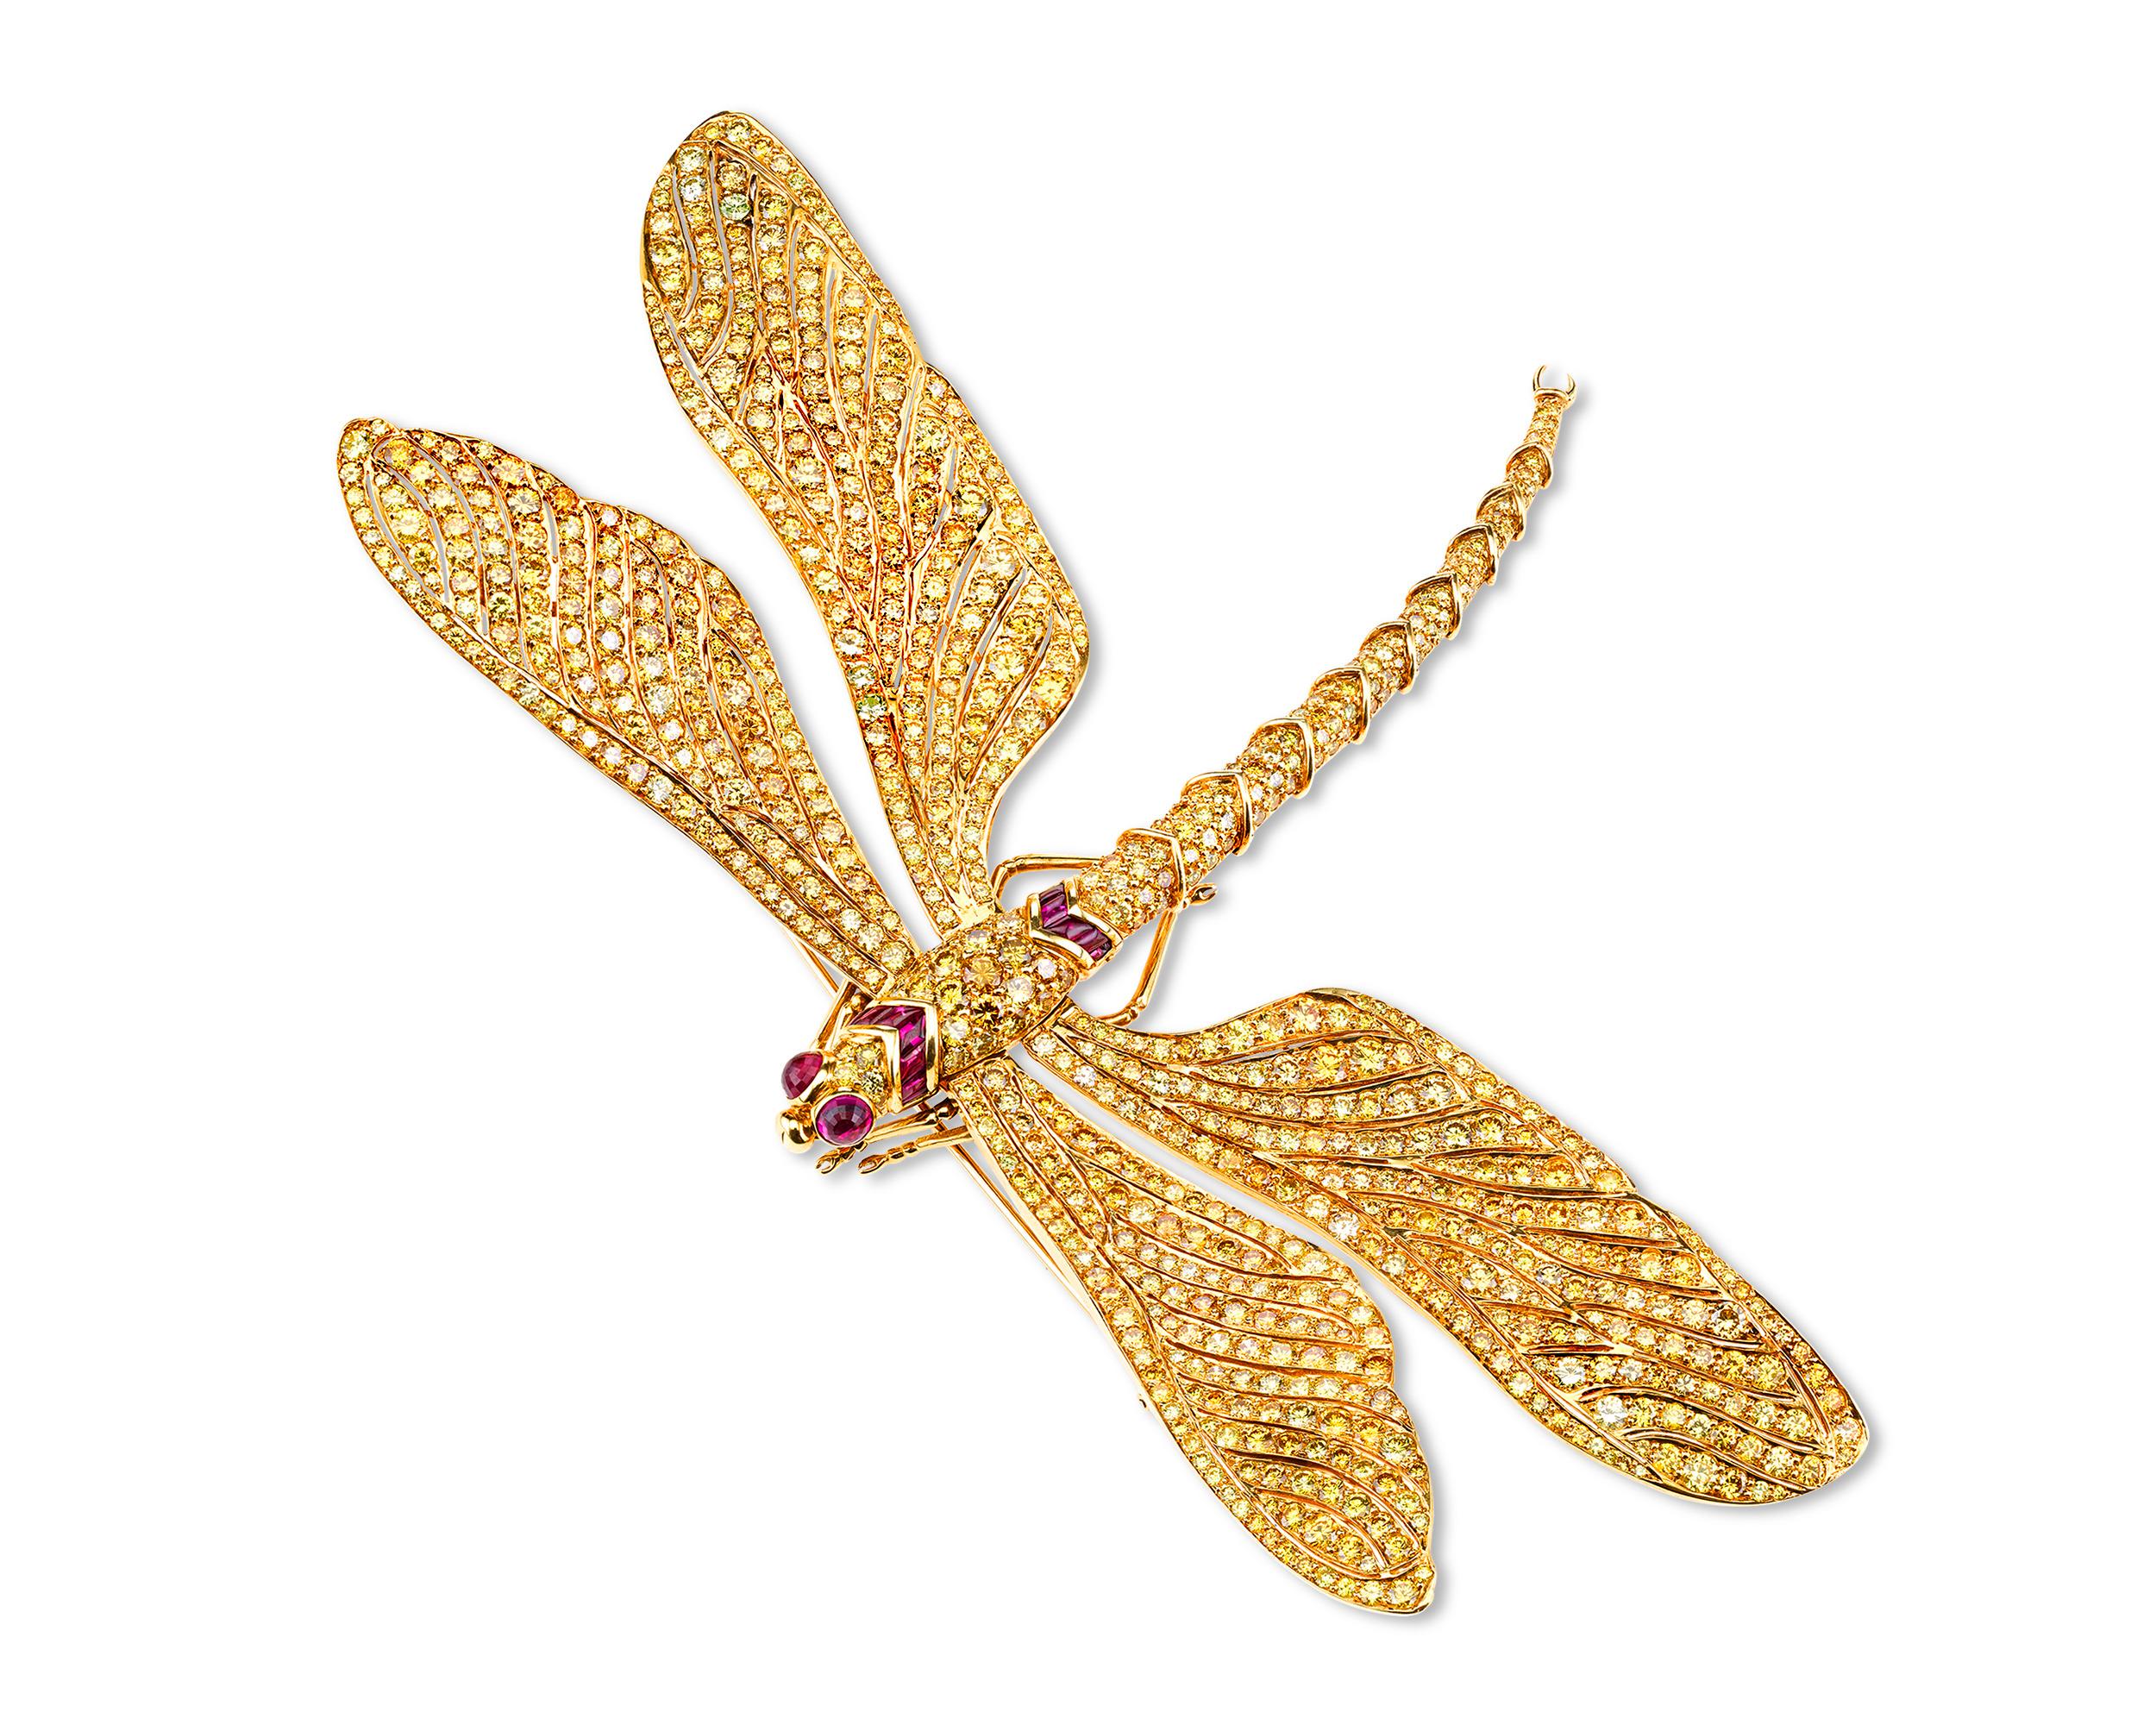 Enveloped in a sea of 60.26 carats of fancy vivid yellow diamonds is this tour de force of jewelry craftsmanship from the collaboration of jewelry legends Fred Leighton and Carvin French. Made for Patricia Kluge, then-wife of the billionaire founder